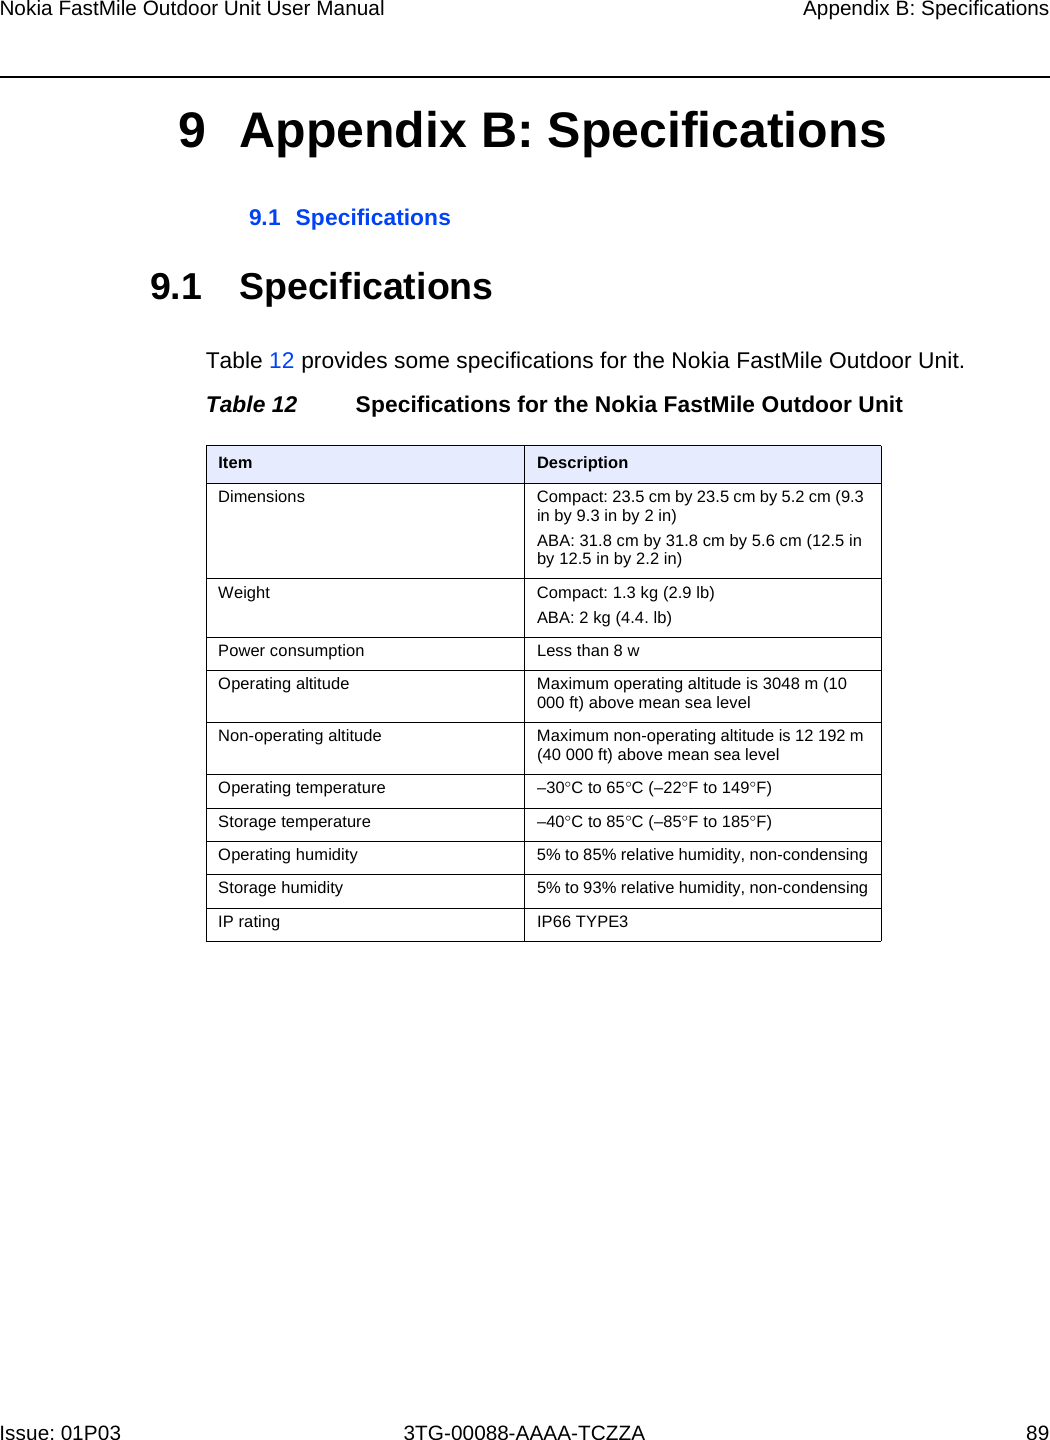 Page 83 of Nokia Bell 34003800FM20 FastMile Compact User Manual Nokia FastMile Outdoor Unit